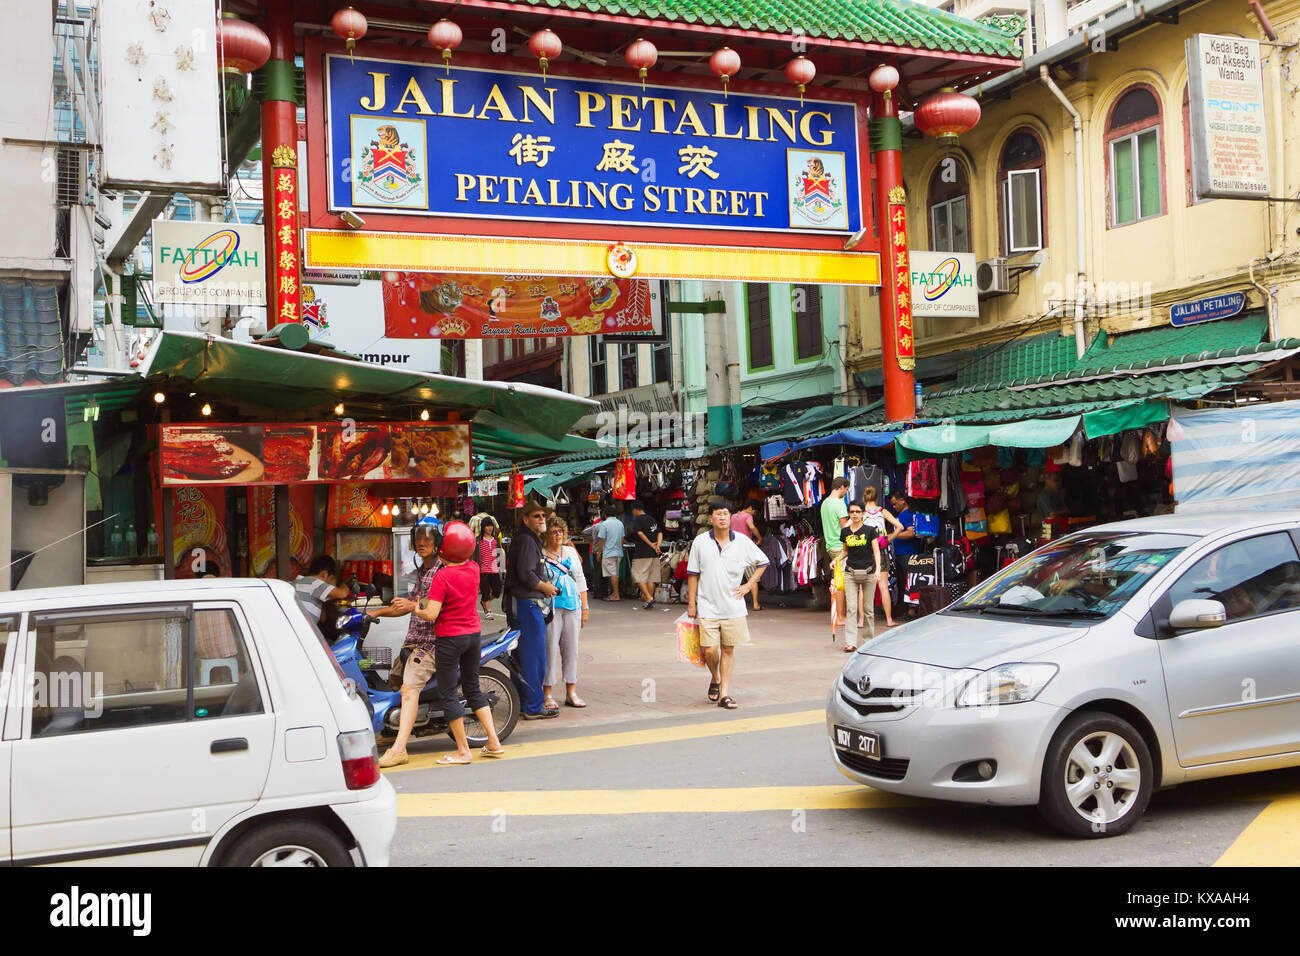 KUALA LUMPUR - DECEMBER 18: Petaling Street on December 18, 2012 in Kuala Lumpur, Malaysia. This street is a long market which specializes in counterf Stock Photo